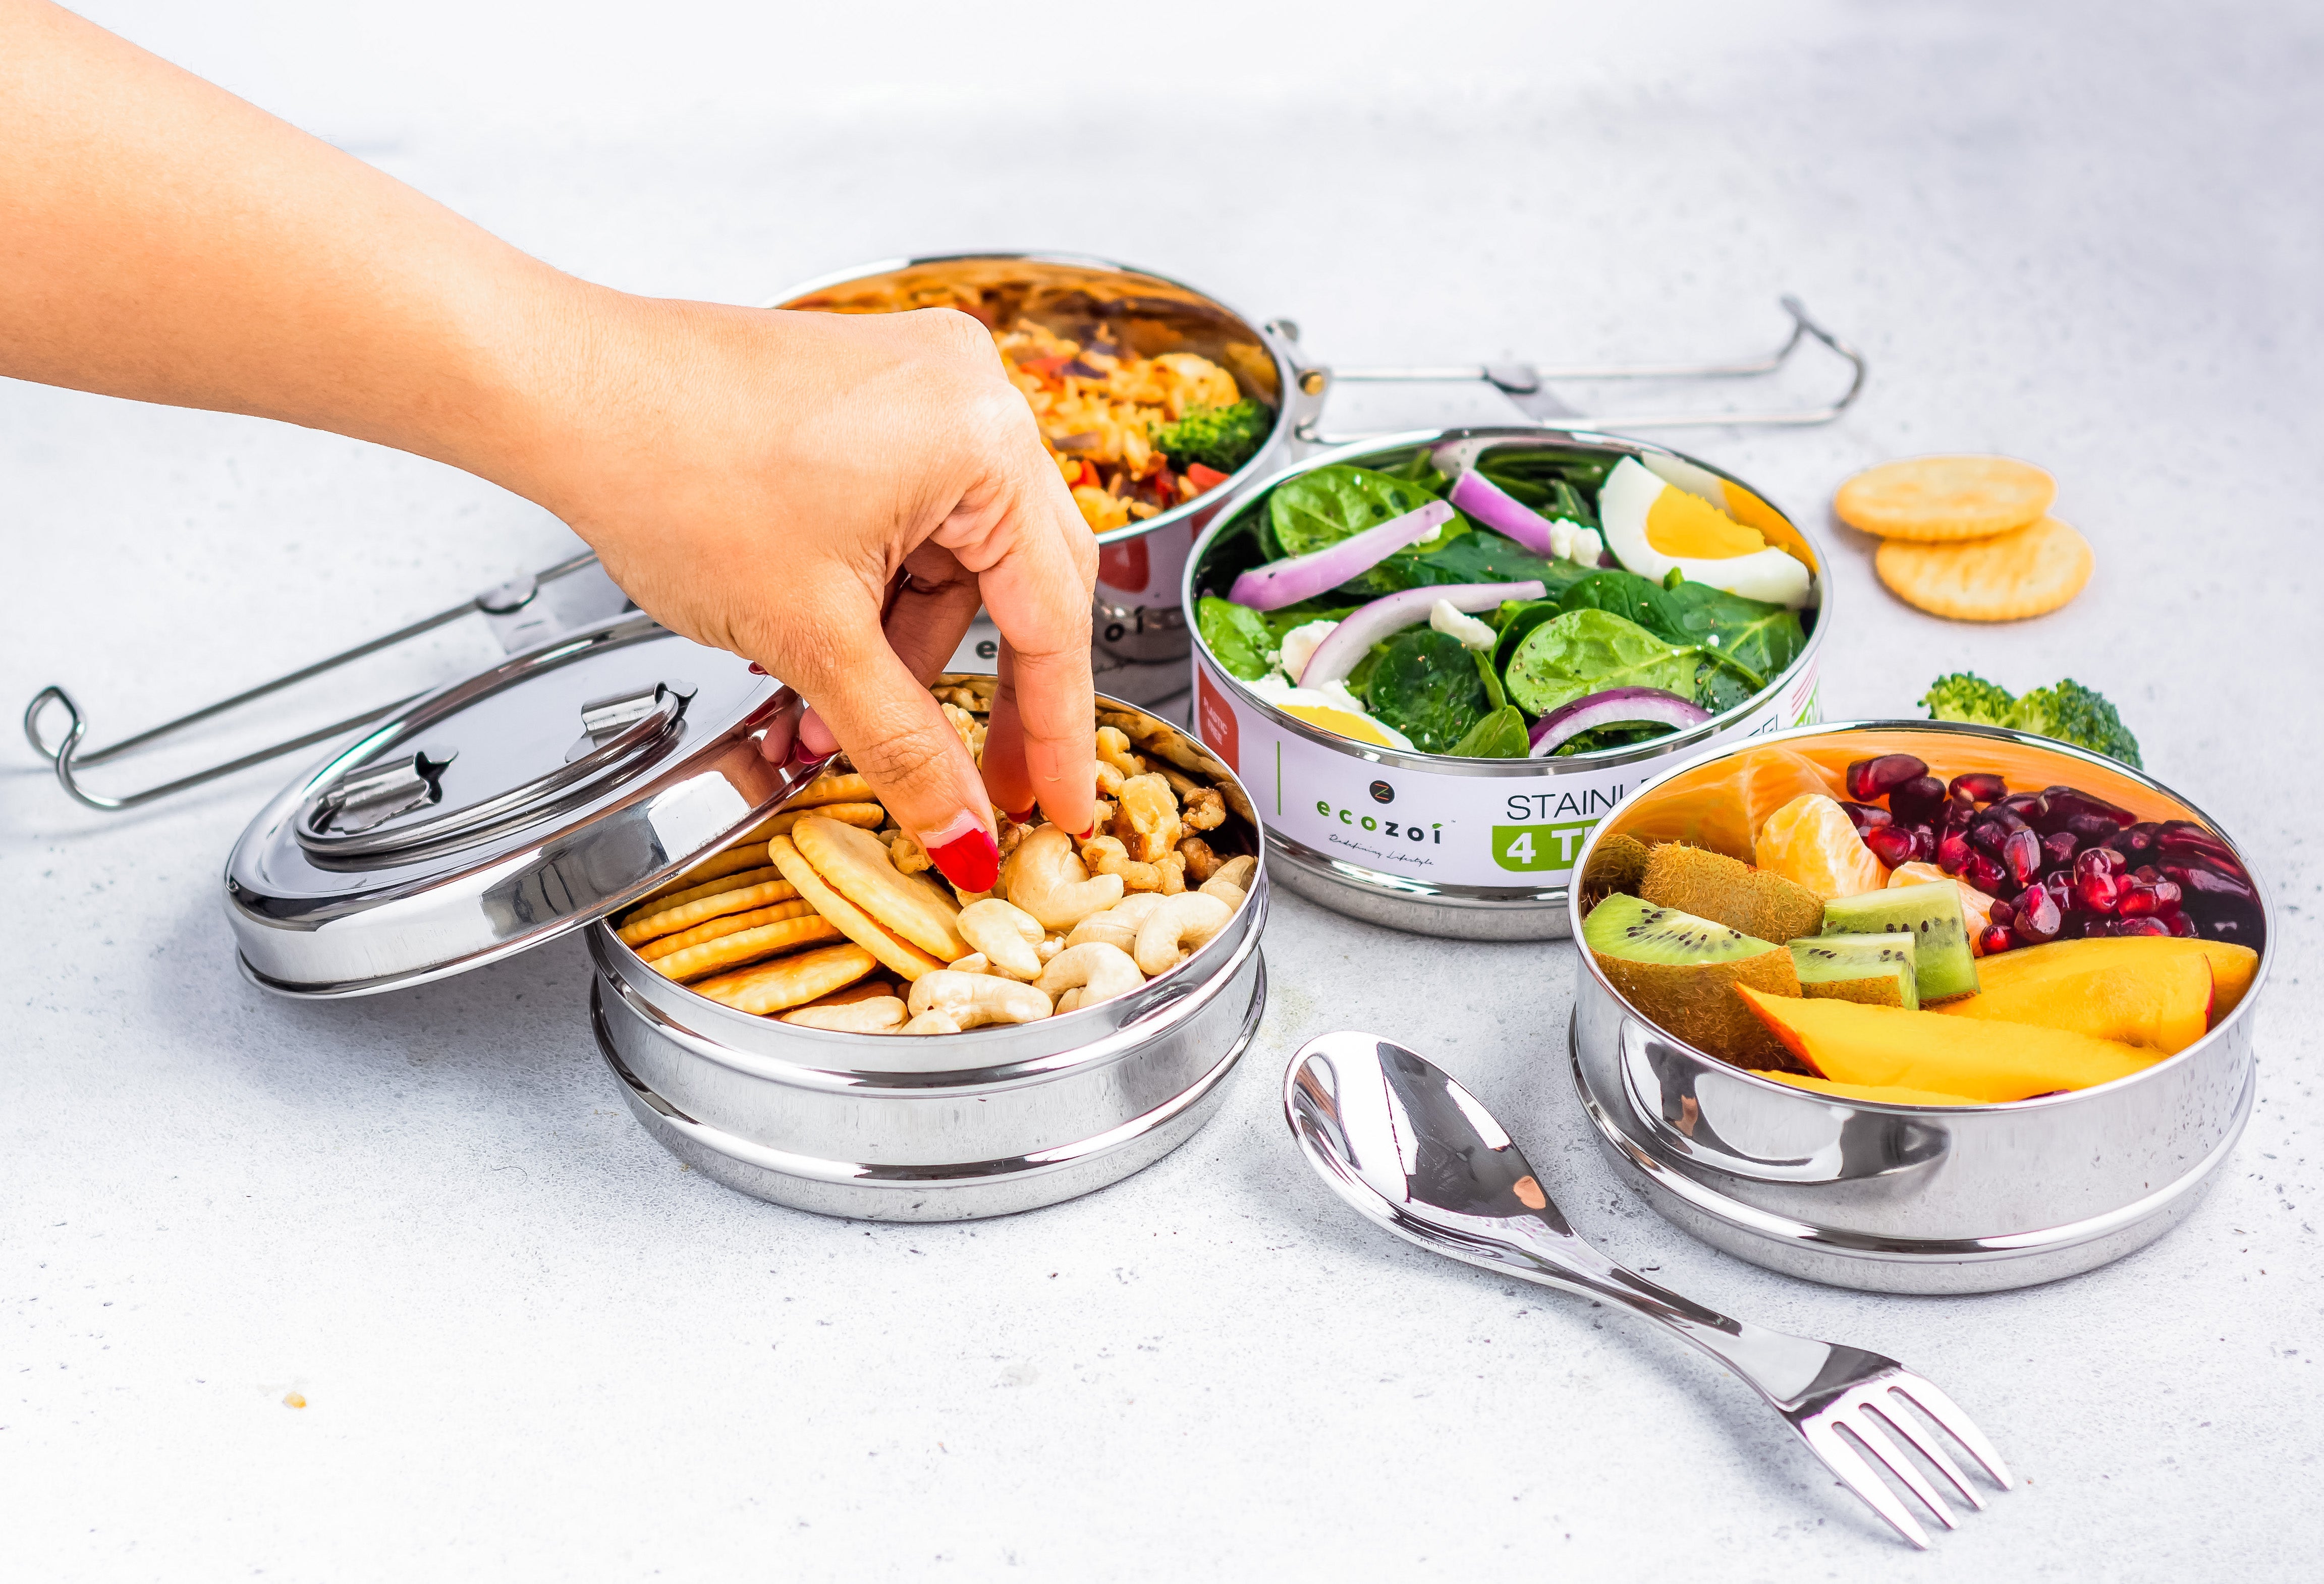 Stainless Steel Eco Lunch Box, 4 Tier Round with Spork, 55 Oz or 1600 ml Lunch Boxes Ecozoi 